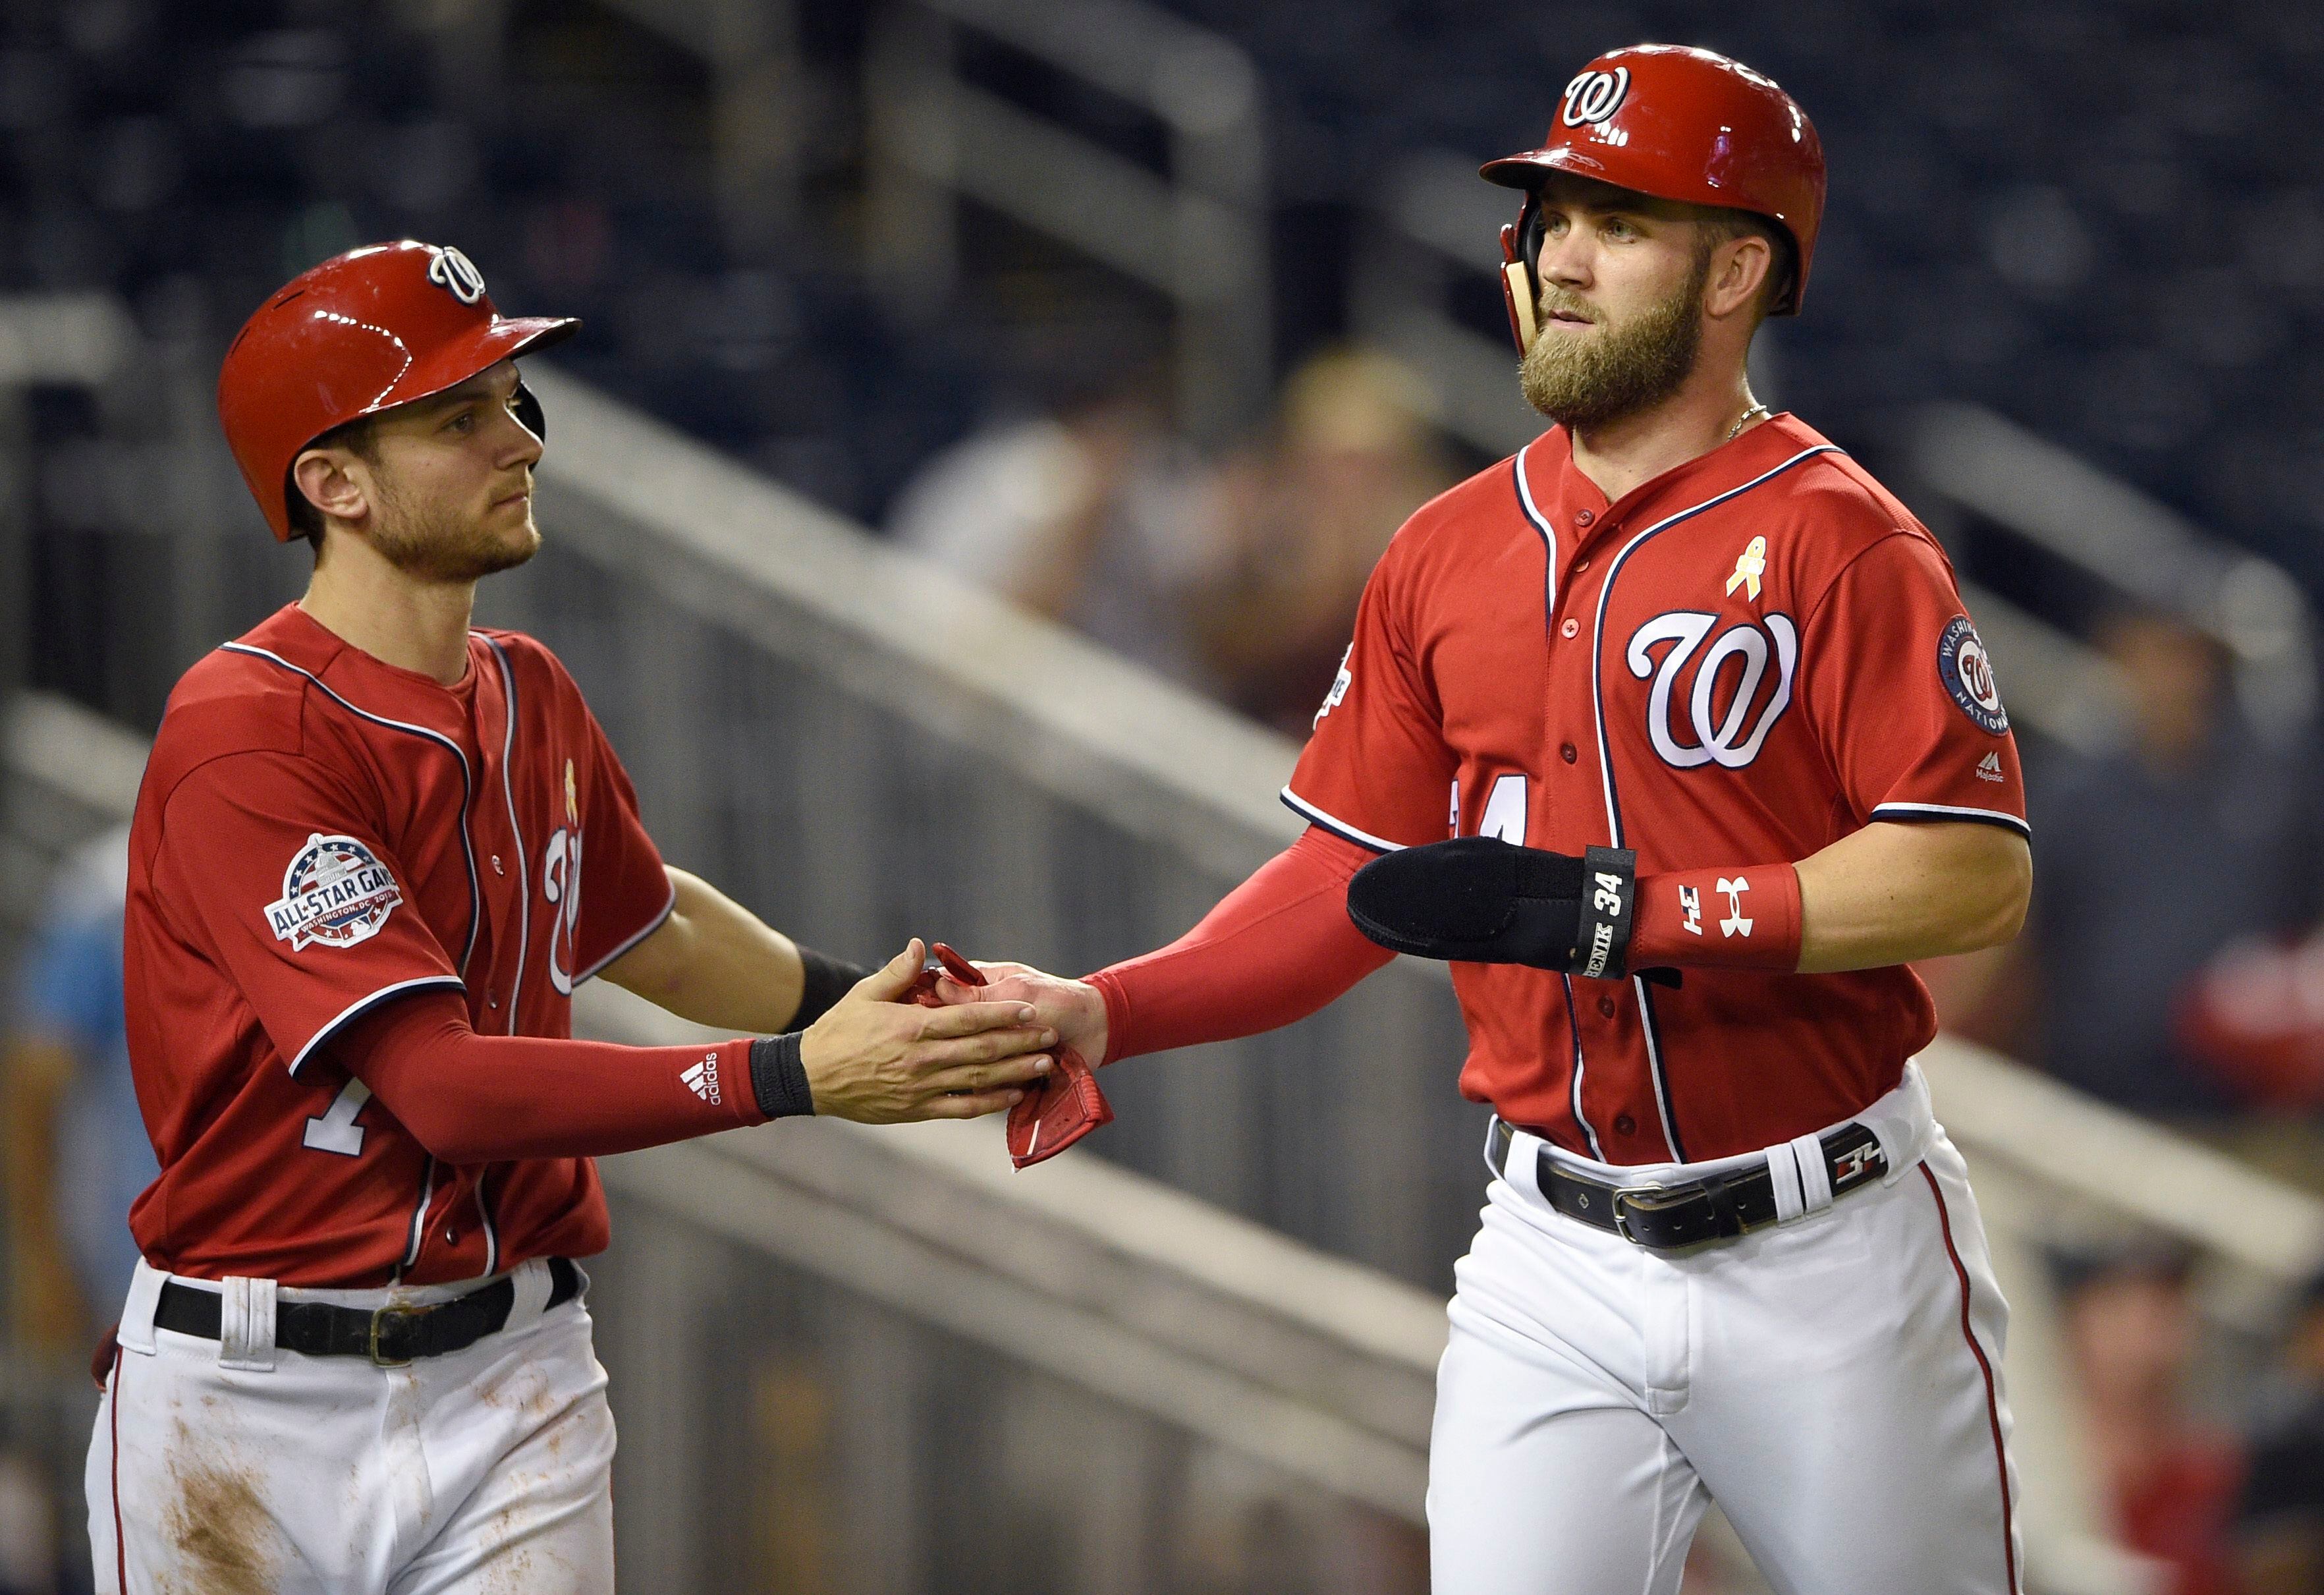 Bryce Harper and Jake Arrieta on J.T. Realmuto's contract situation   Phillies Nation - Your source for Philadelphia Phillies news, opinion,  history, rumors, events, and other fun stuff.